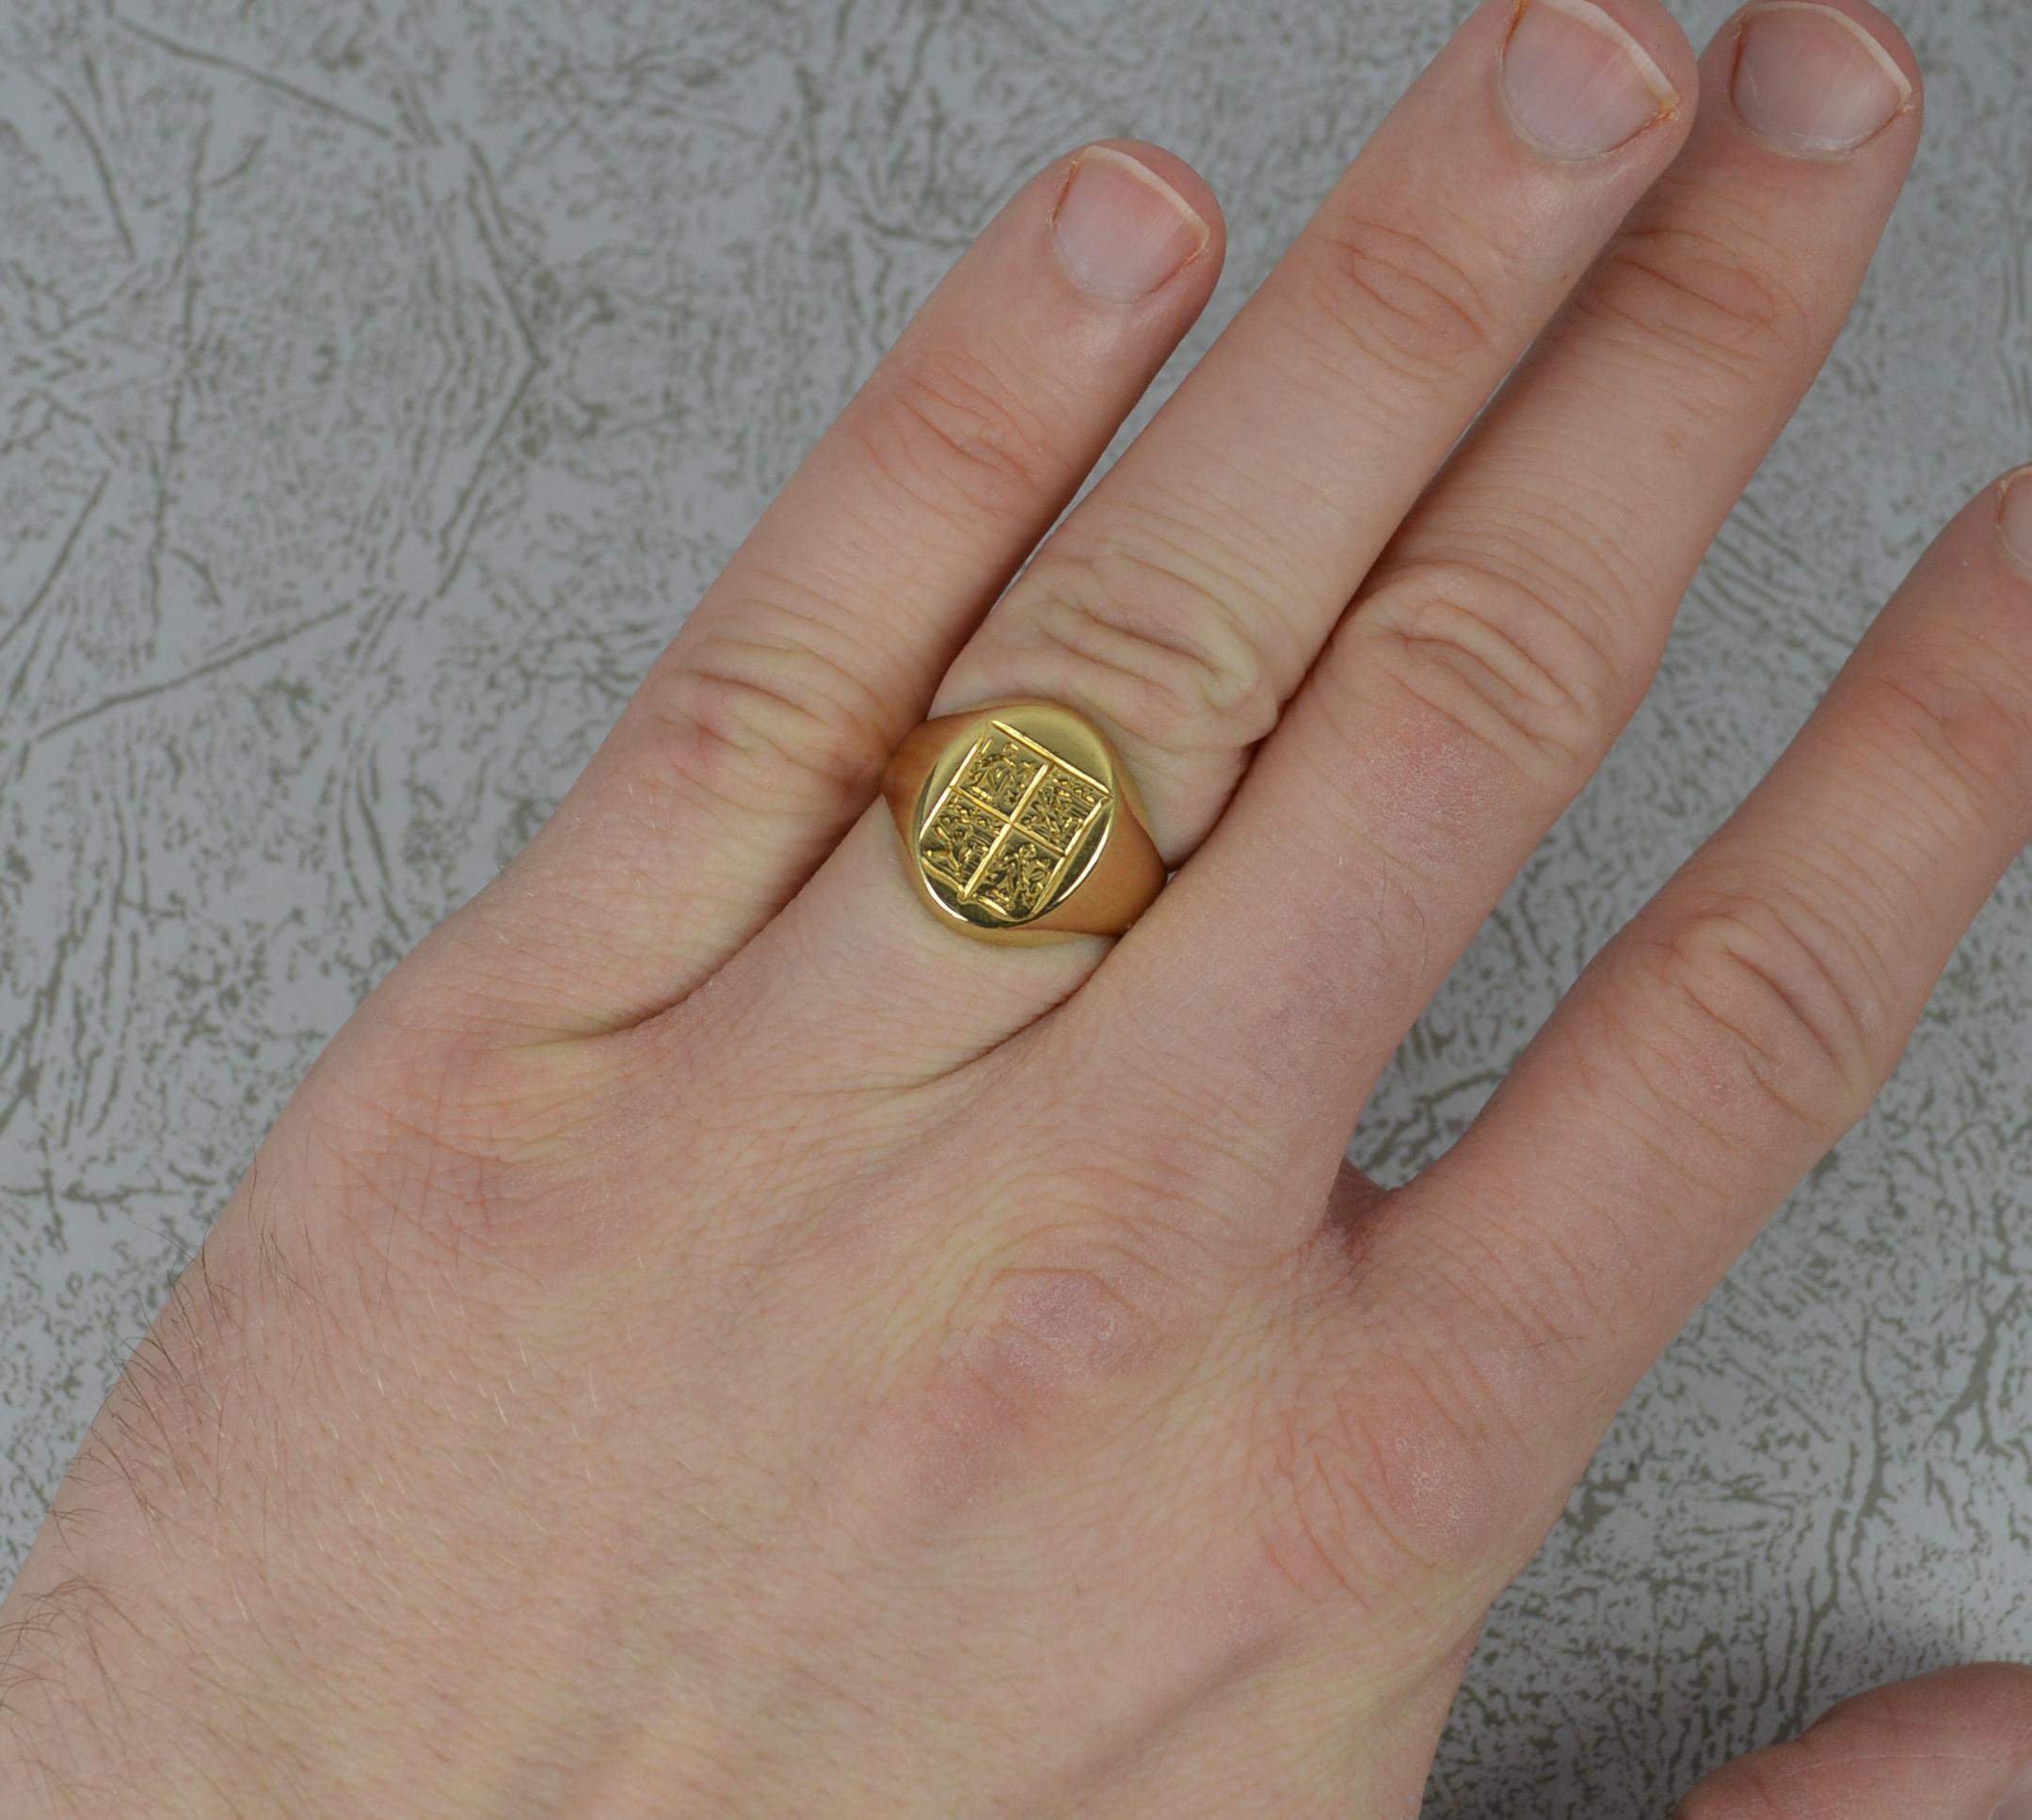 A superb vintage intaglio signet ring.
18 carat yellow gold example.
11mm x 15mm head.
The intaglio depicts a family crest. 

CONDITION ; Very good. Clean band. Crisp intaglio. Light general wear only. Please view photographs.

WEIGHT ; 6.7